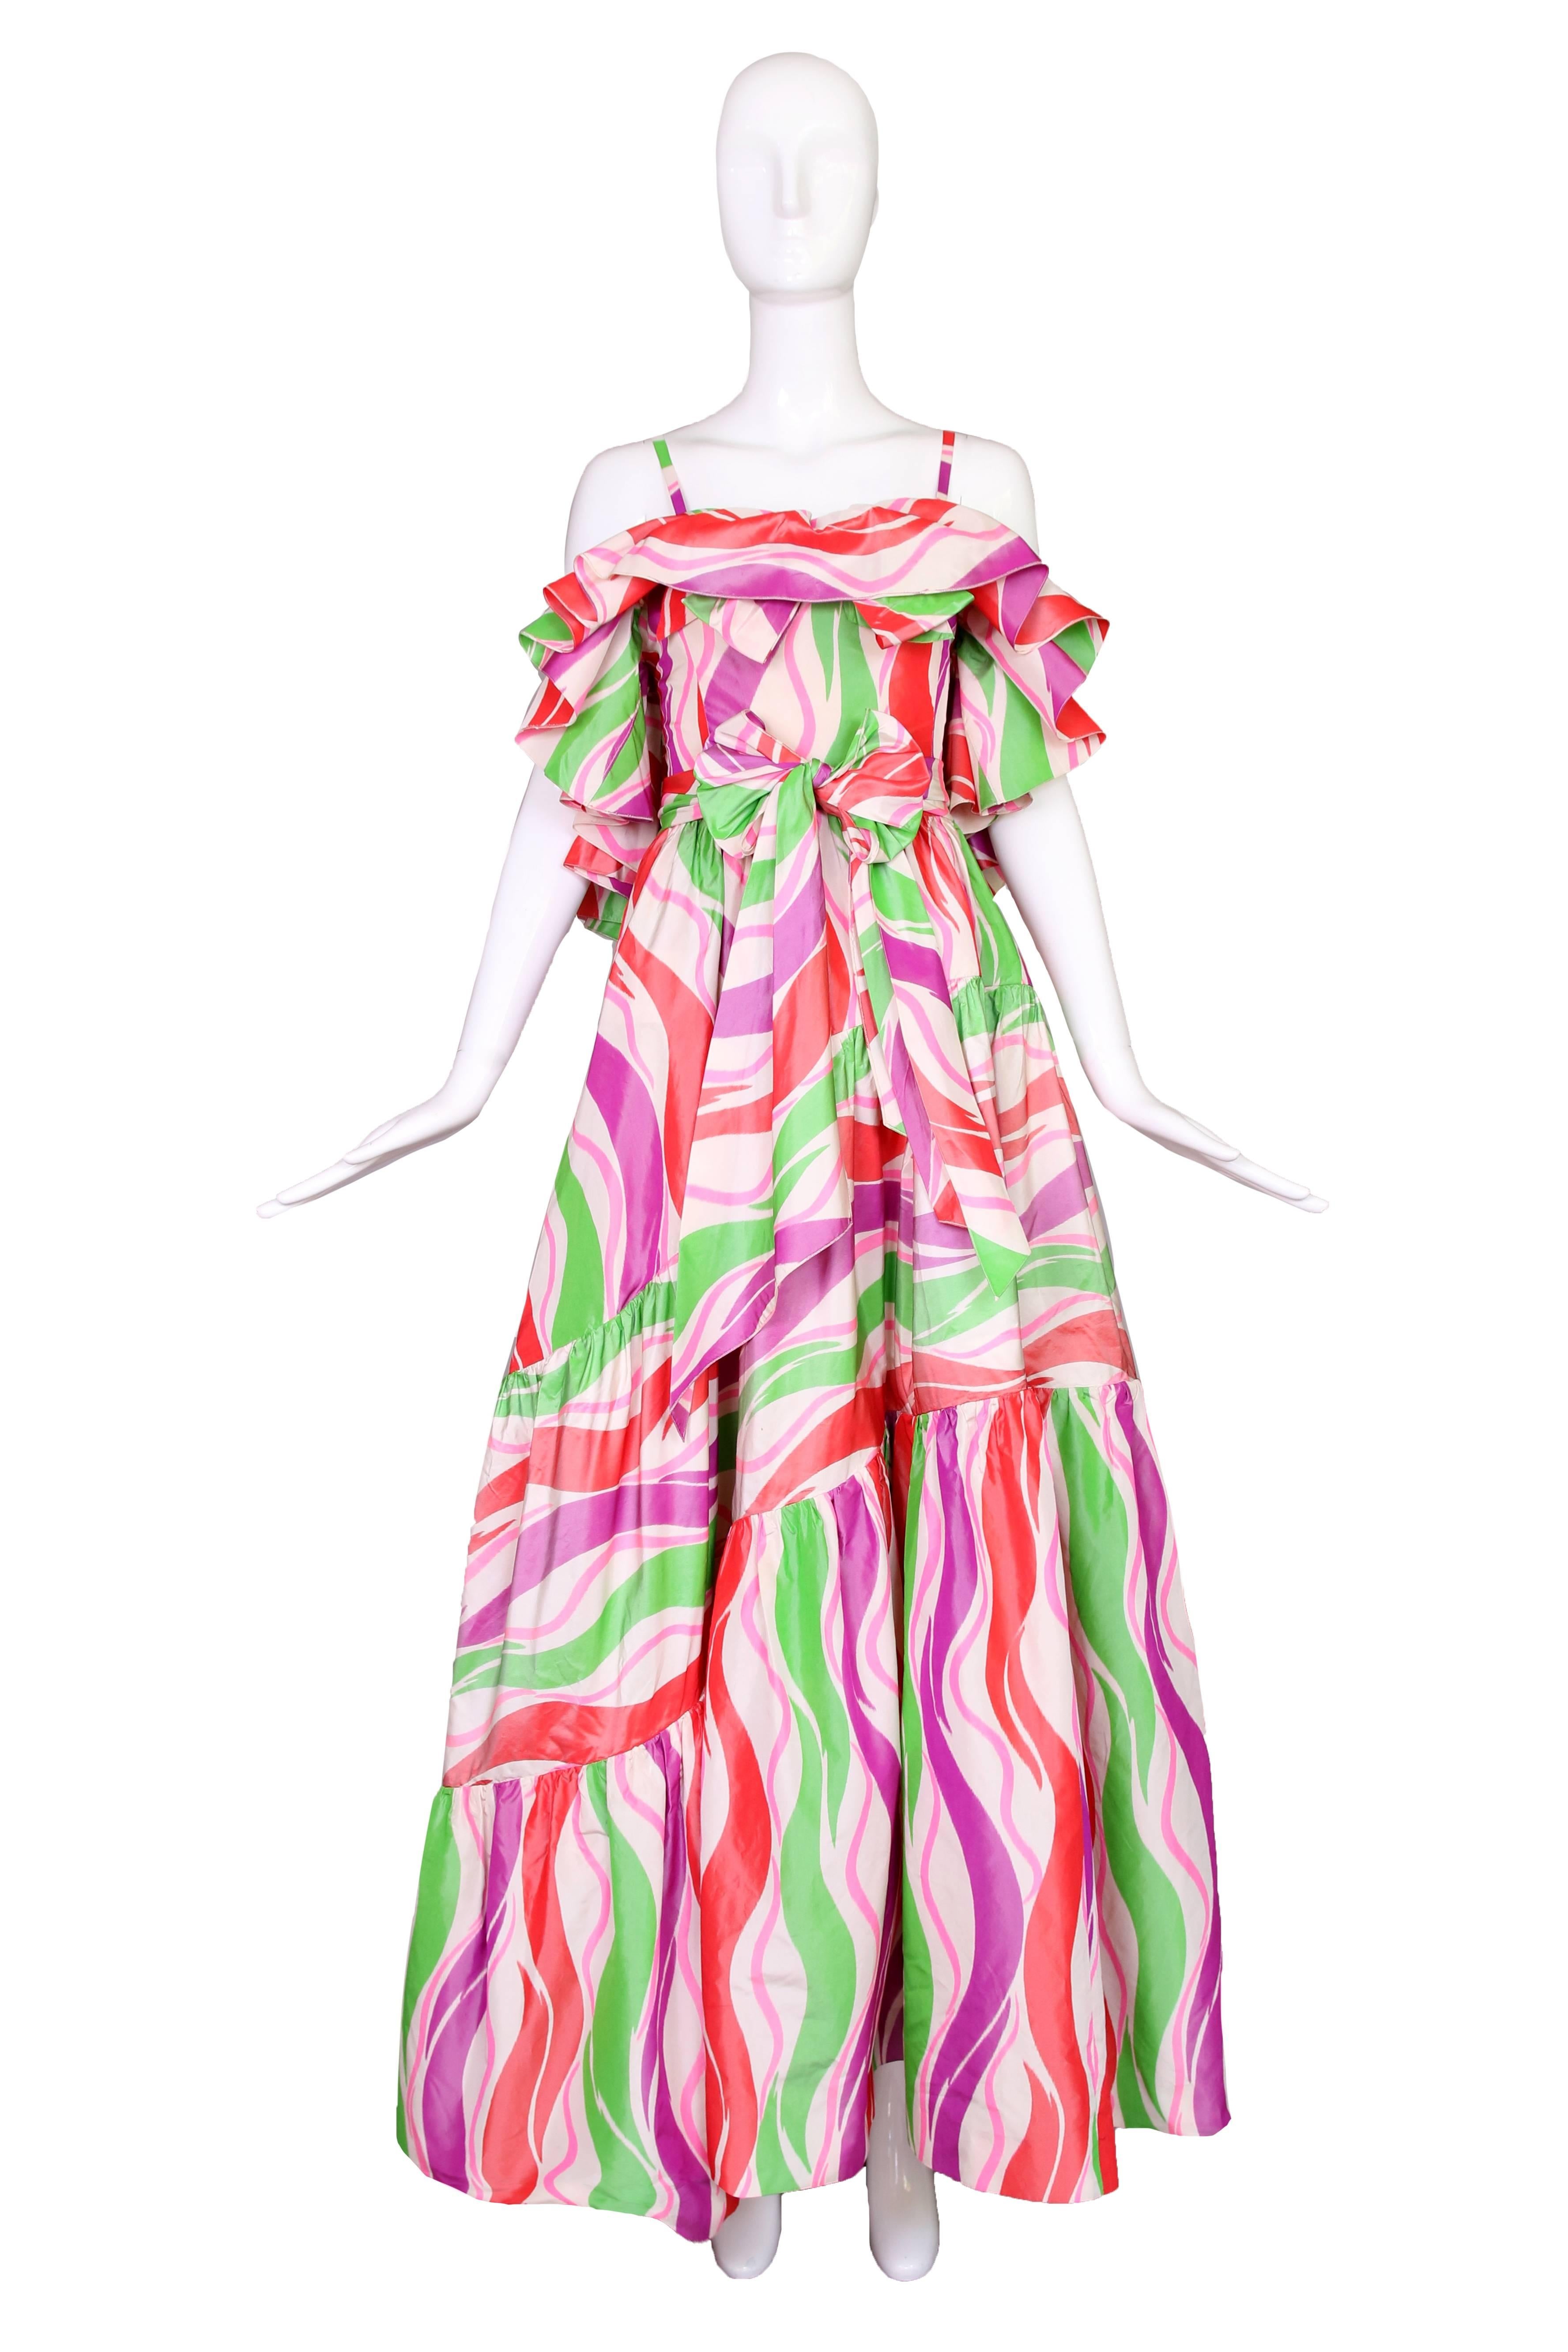 Circa 1979 beyond gorgeous Yves Saint Laurent haute couture silk taffeta green, purple, pink and red abstract print evening gown with detachable sash. In excellent condition.
MEASUREMENTS:
Bust - 30